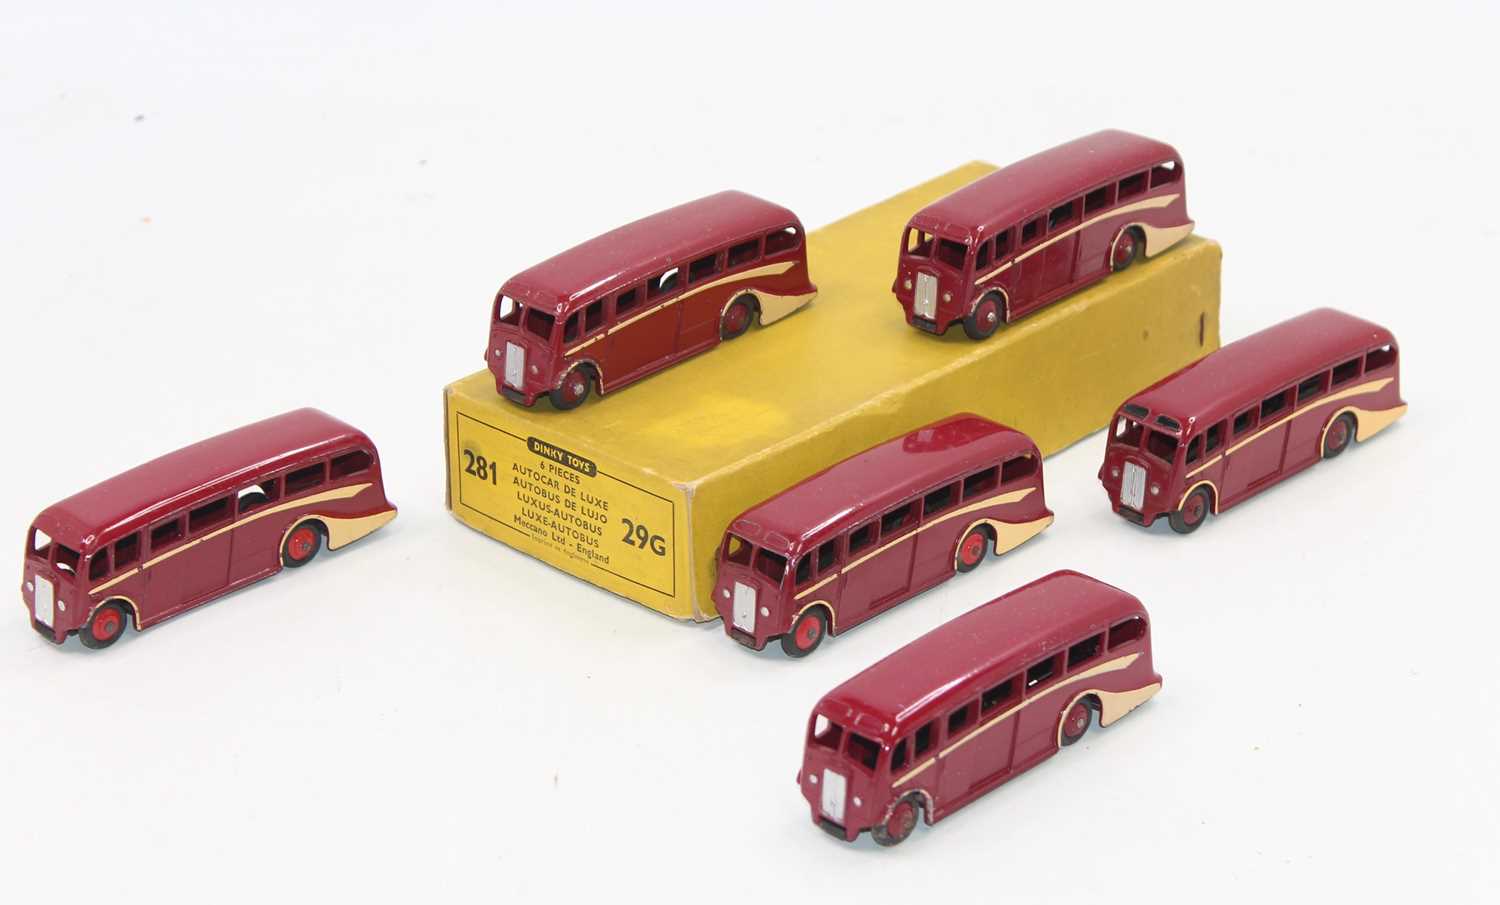 An original no.29g Dinky Trade box of 6x Luxury coaches in red, all in very good condition for age.